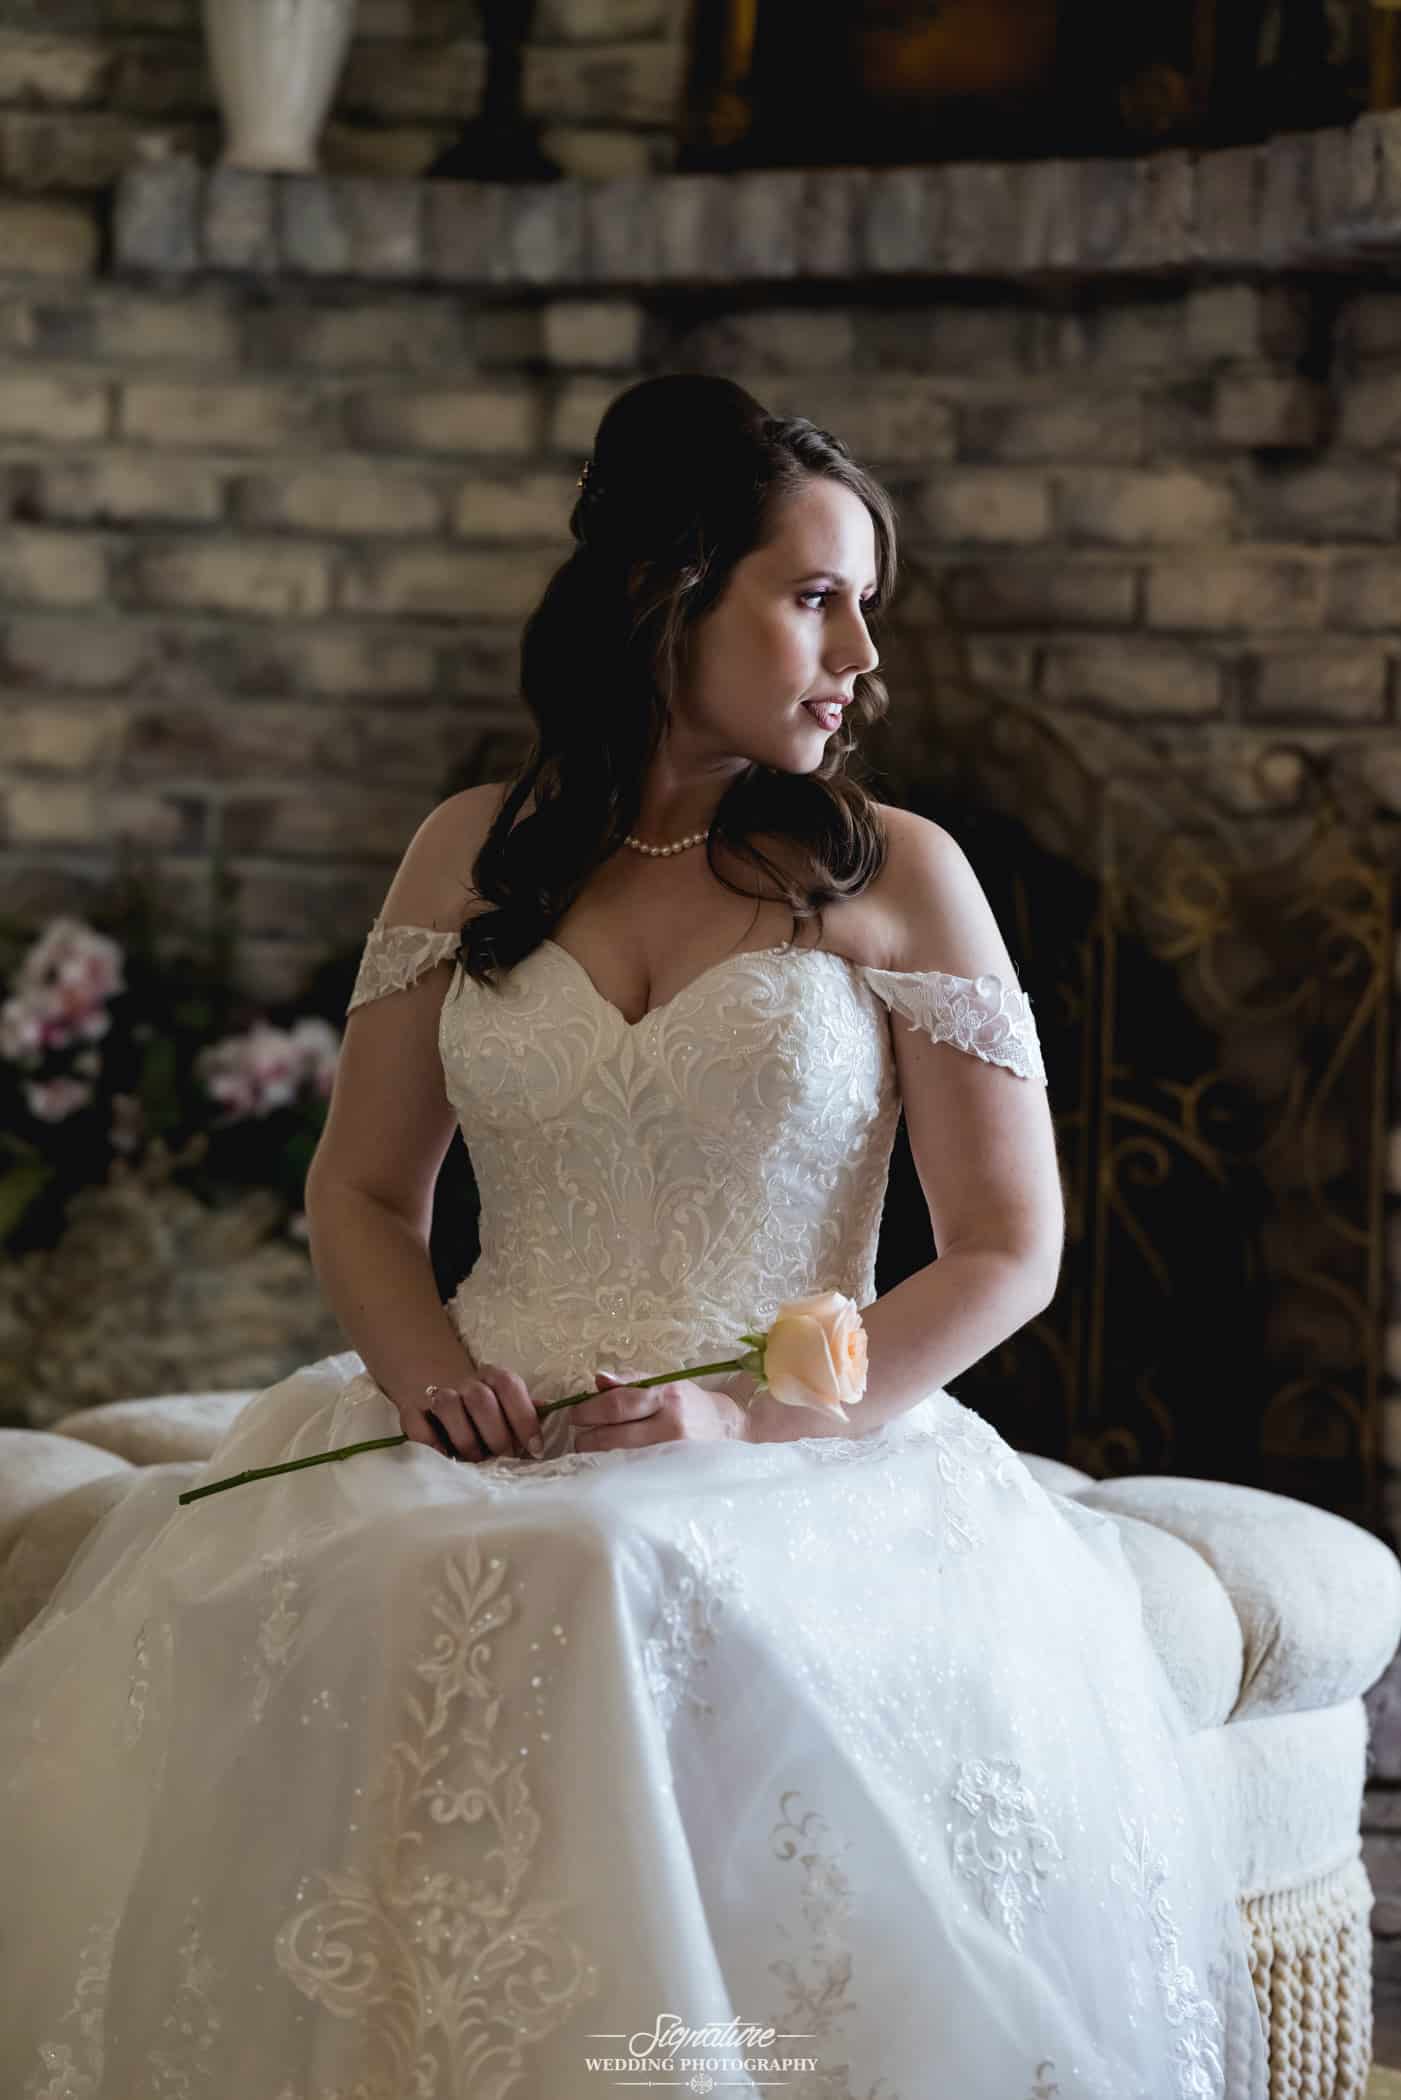 Bride sitting holding flower looking to side